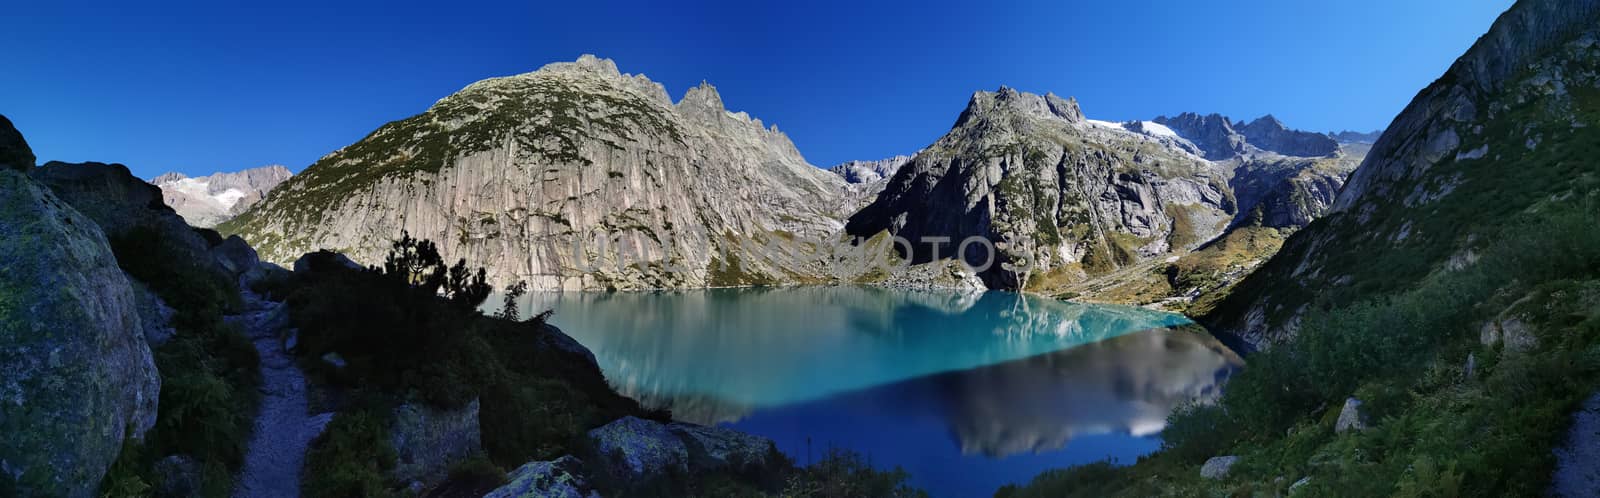 Gelmersee. Dam in the Swiss alps for Hydro power. Clear Blue lake with clear sky.